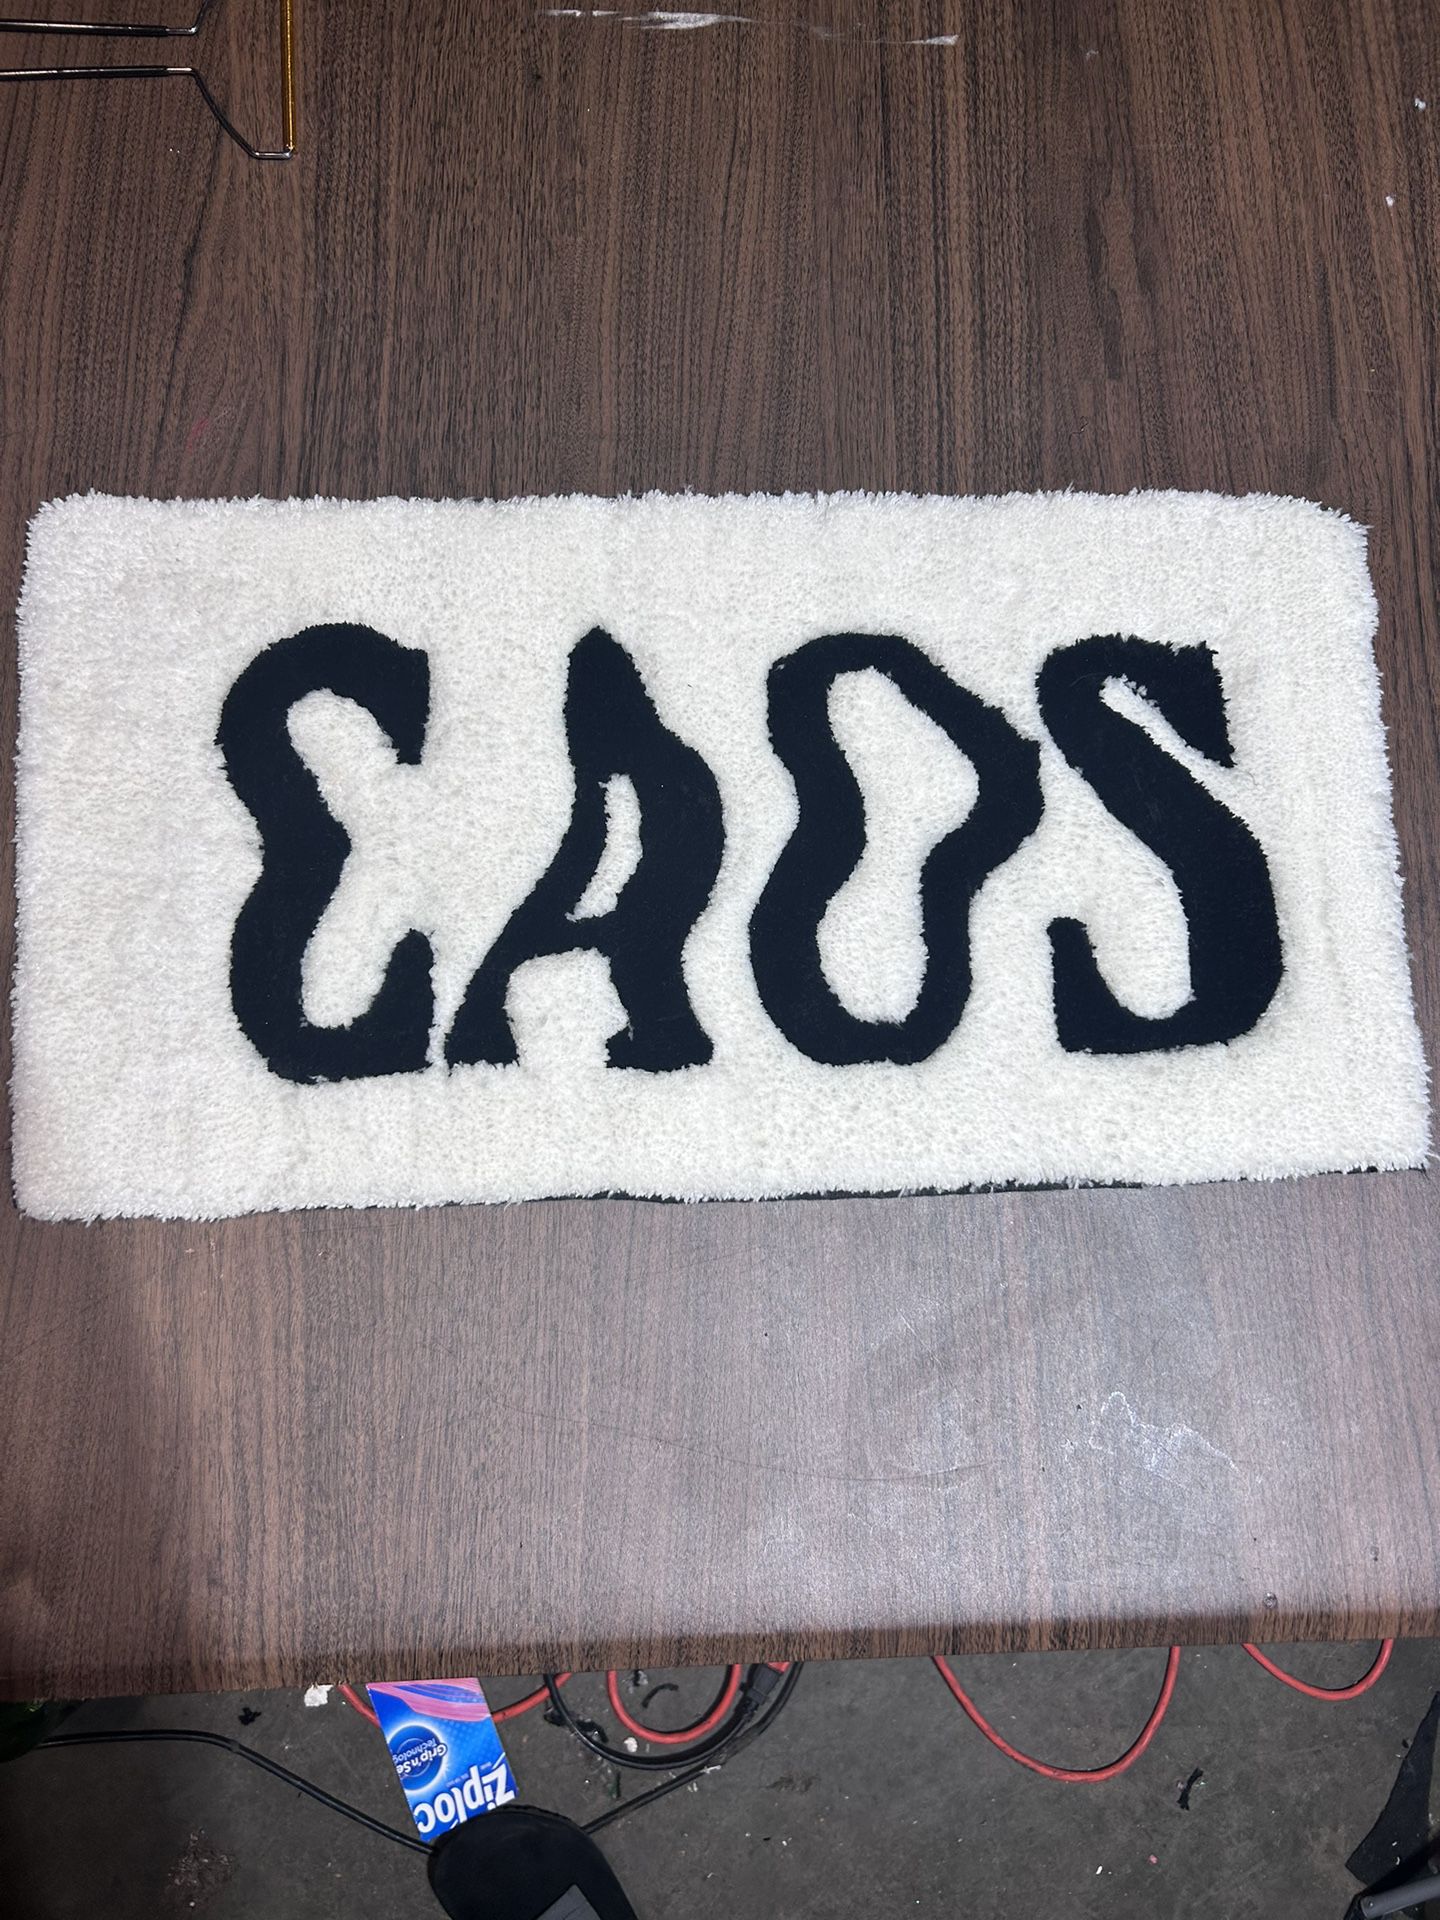 Caos(chaos In Spanish)customs Tufted Rug(sparkling 